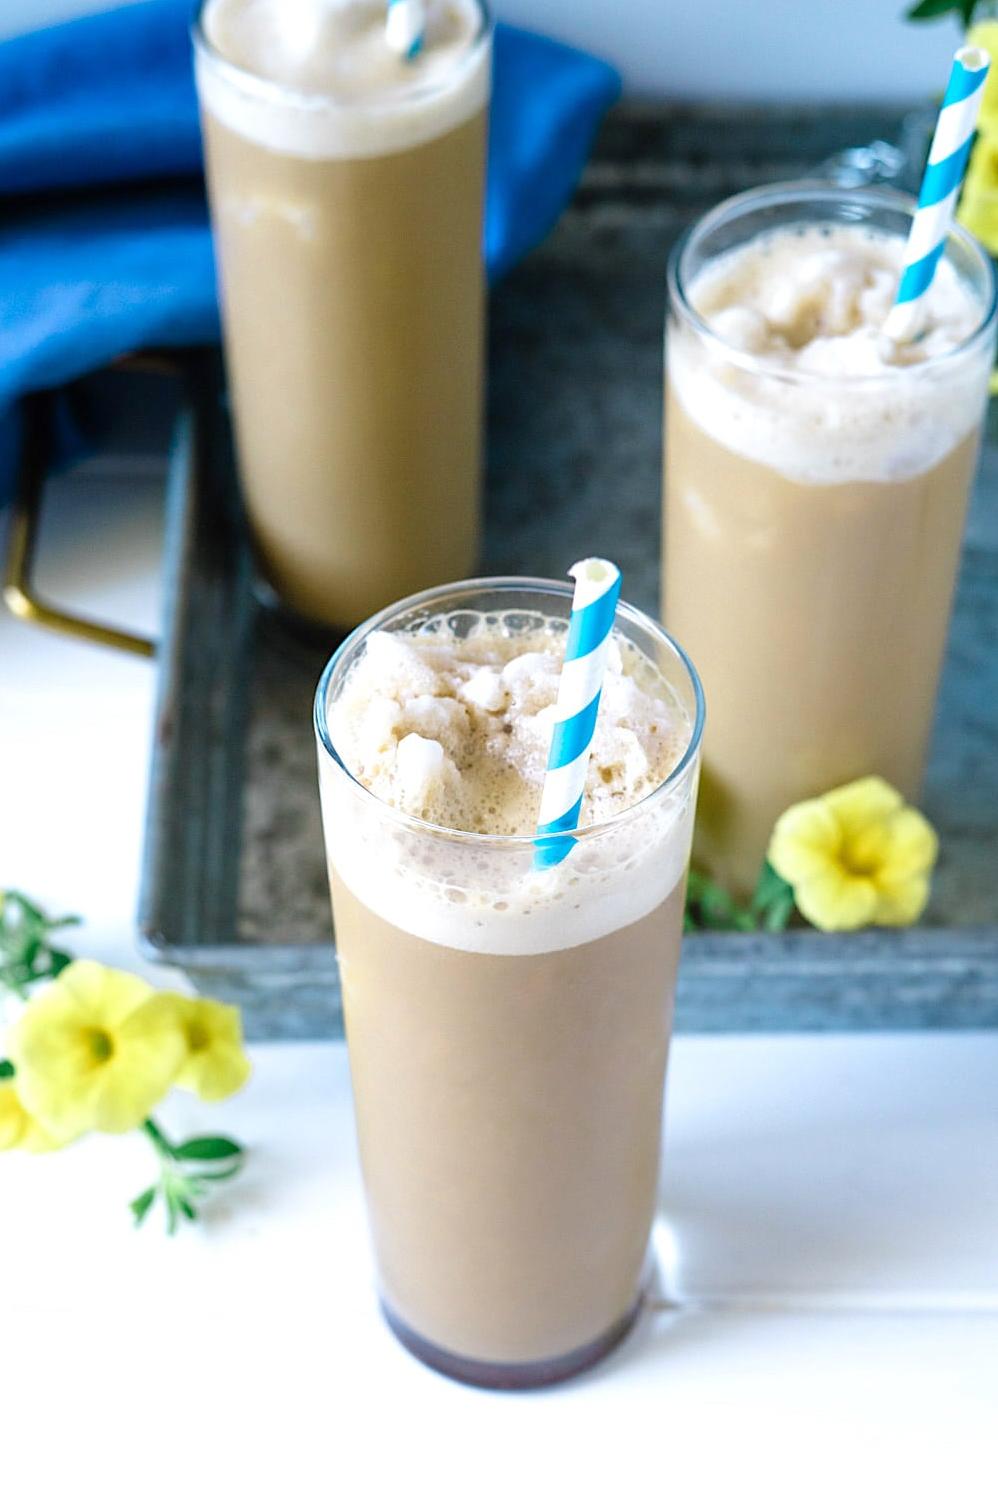  When the heat is high, this cold and creamy beverage is the perfect way to chill out.